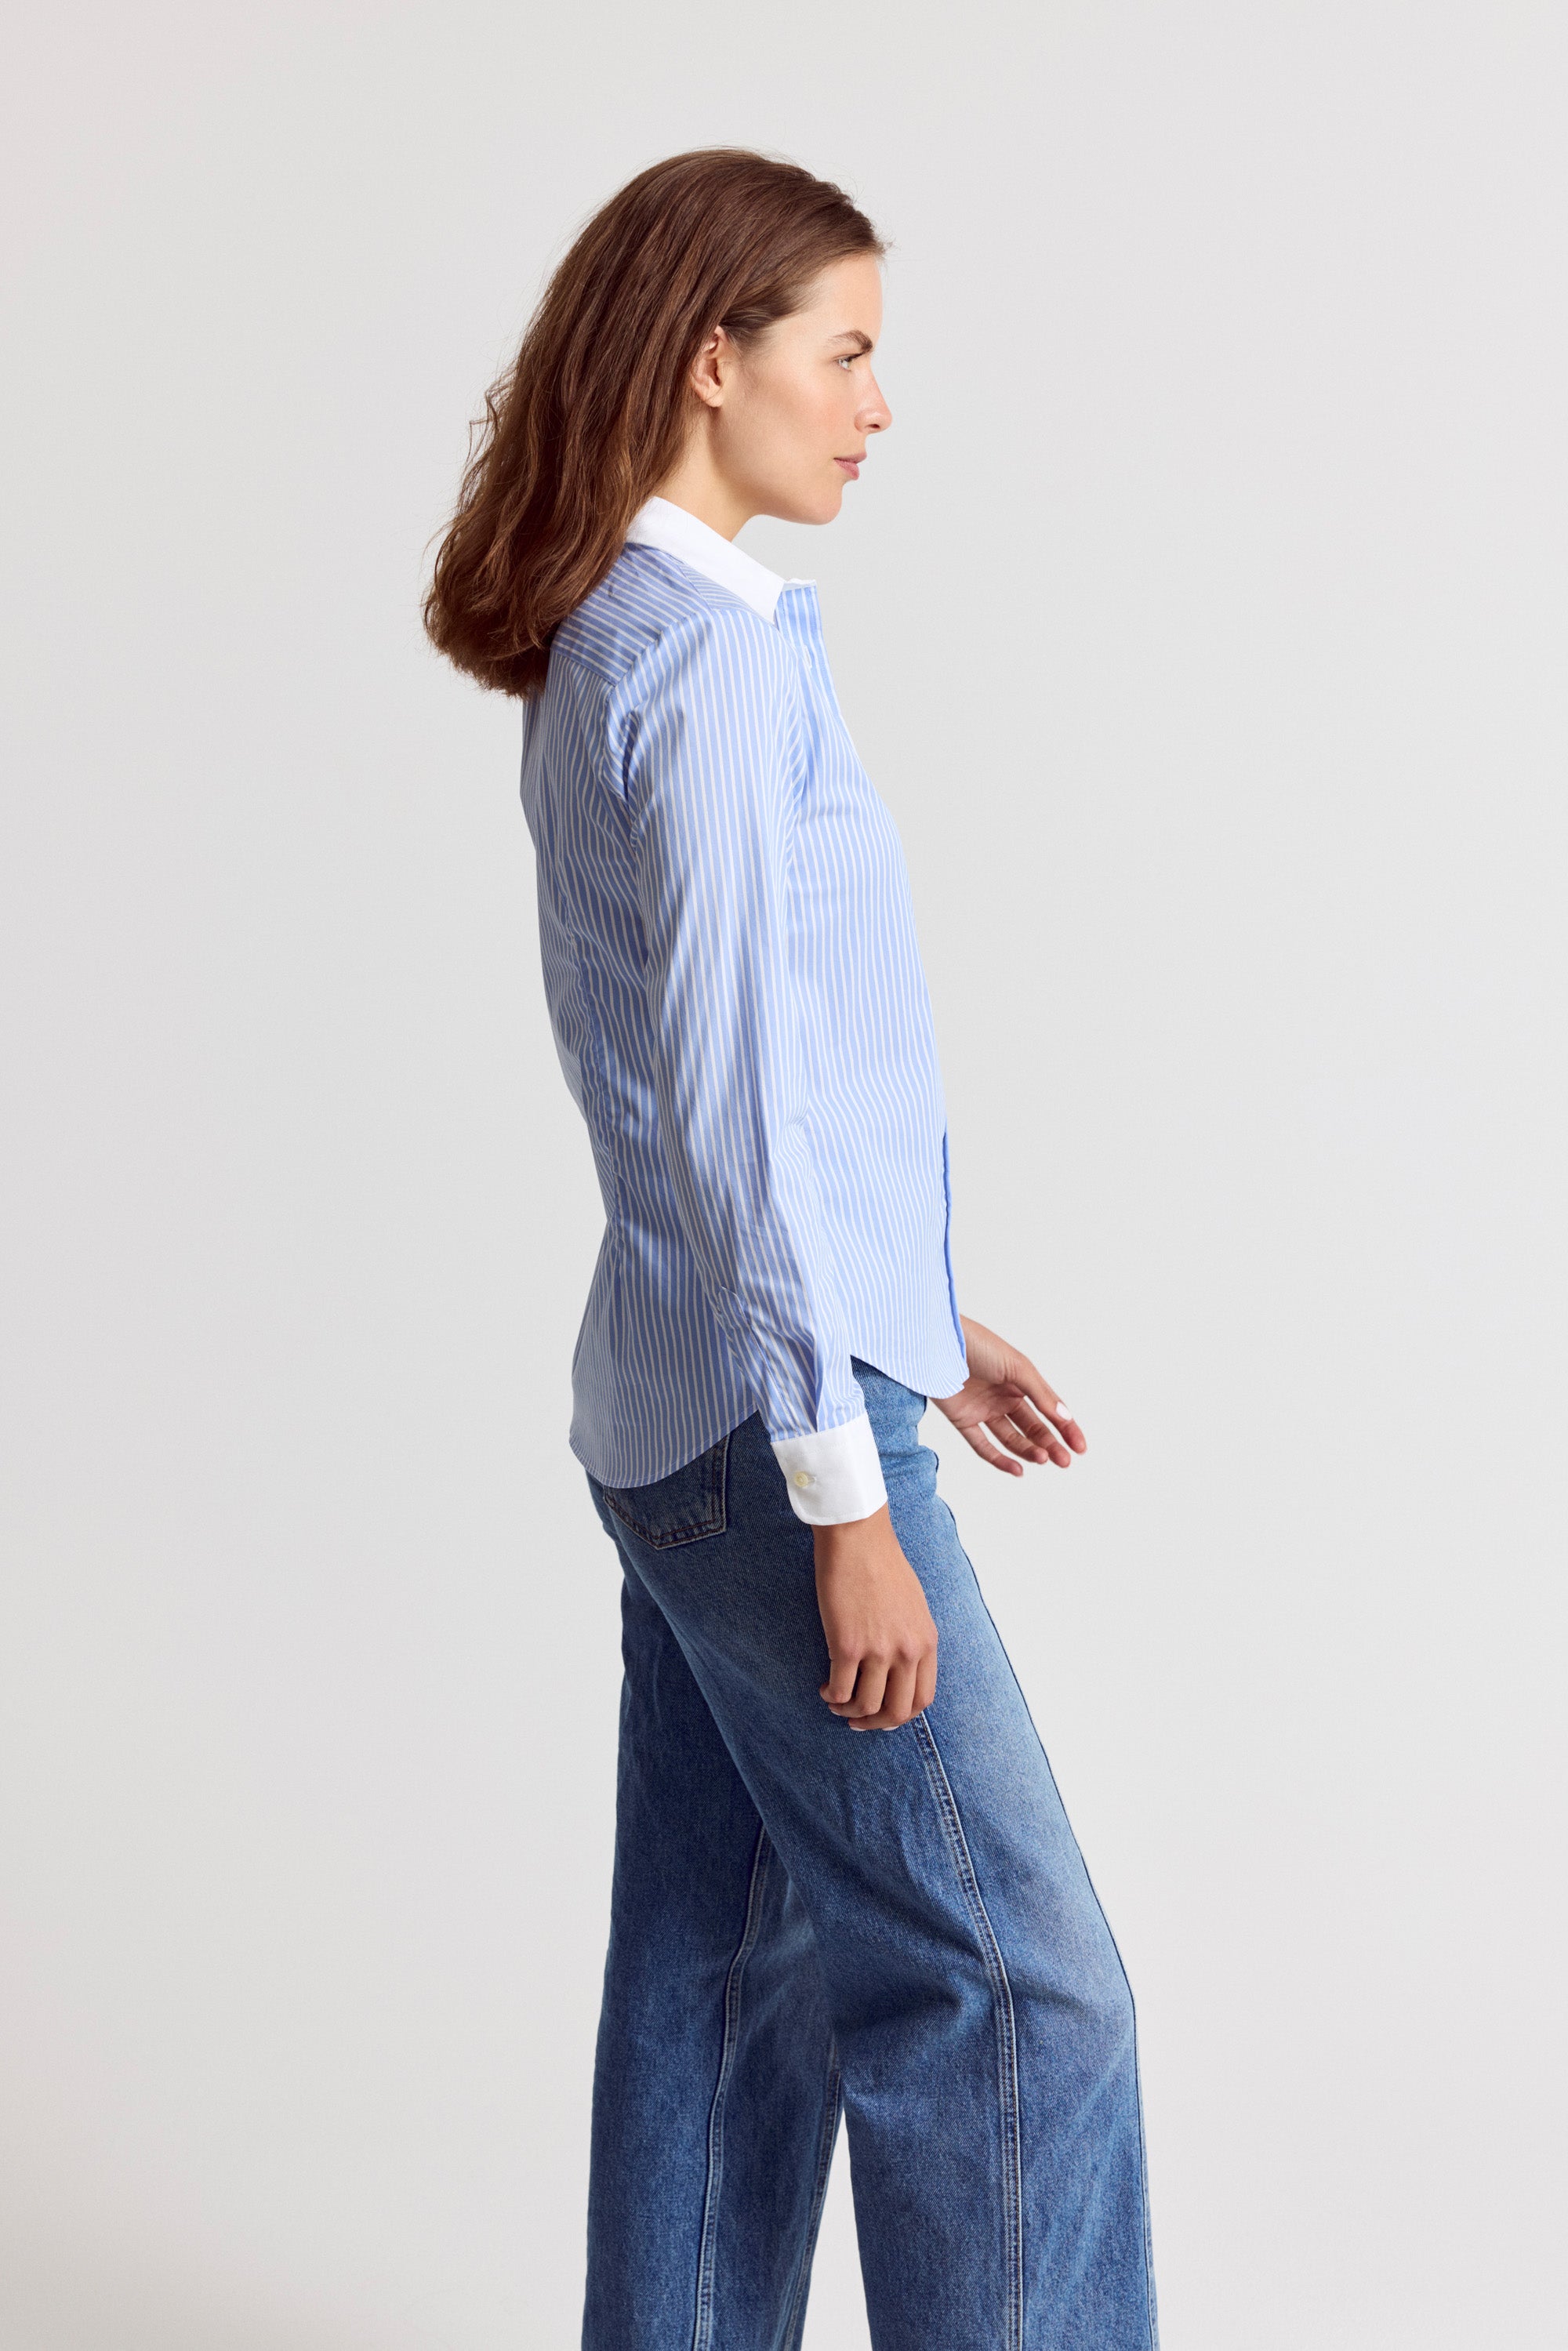 The Shirt by Rochelle Behrens - The Icon Shirt in Stripe - Sky Blue ...